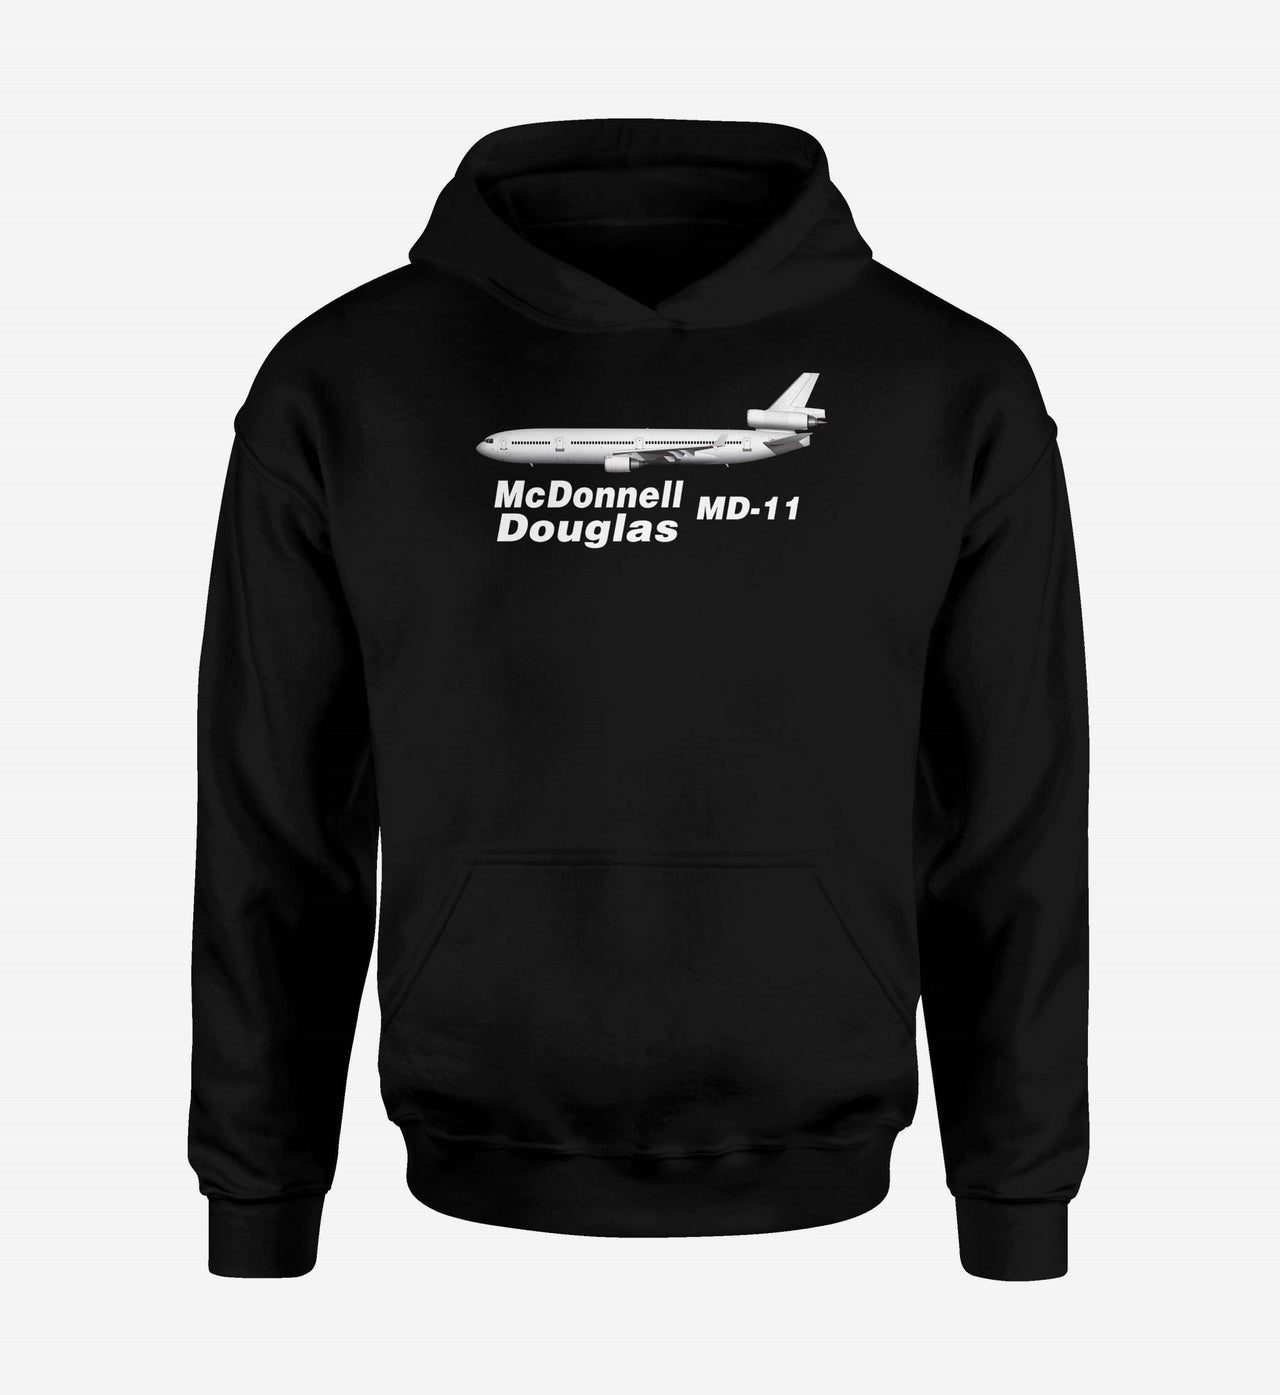 The McDonnell Douglas MD-11 Designed Hoodies